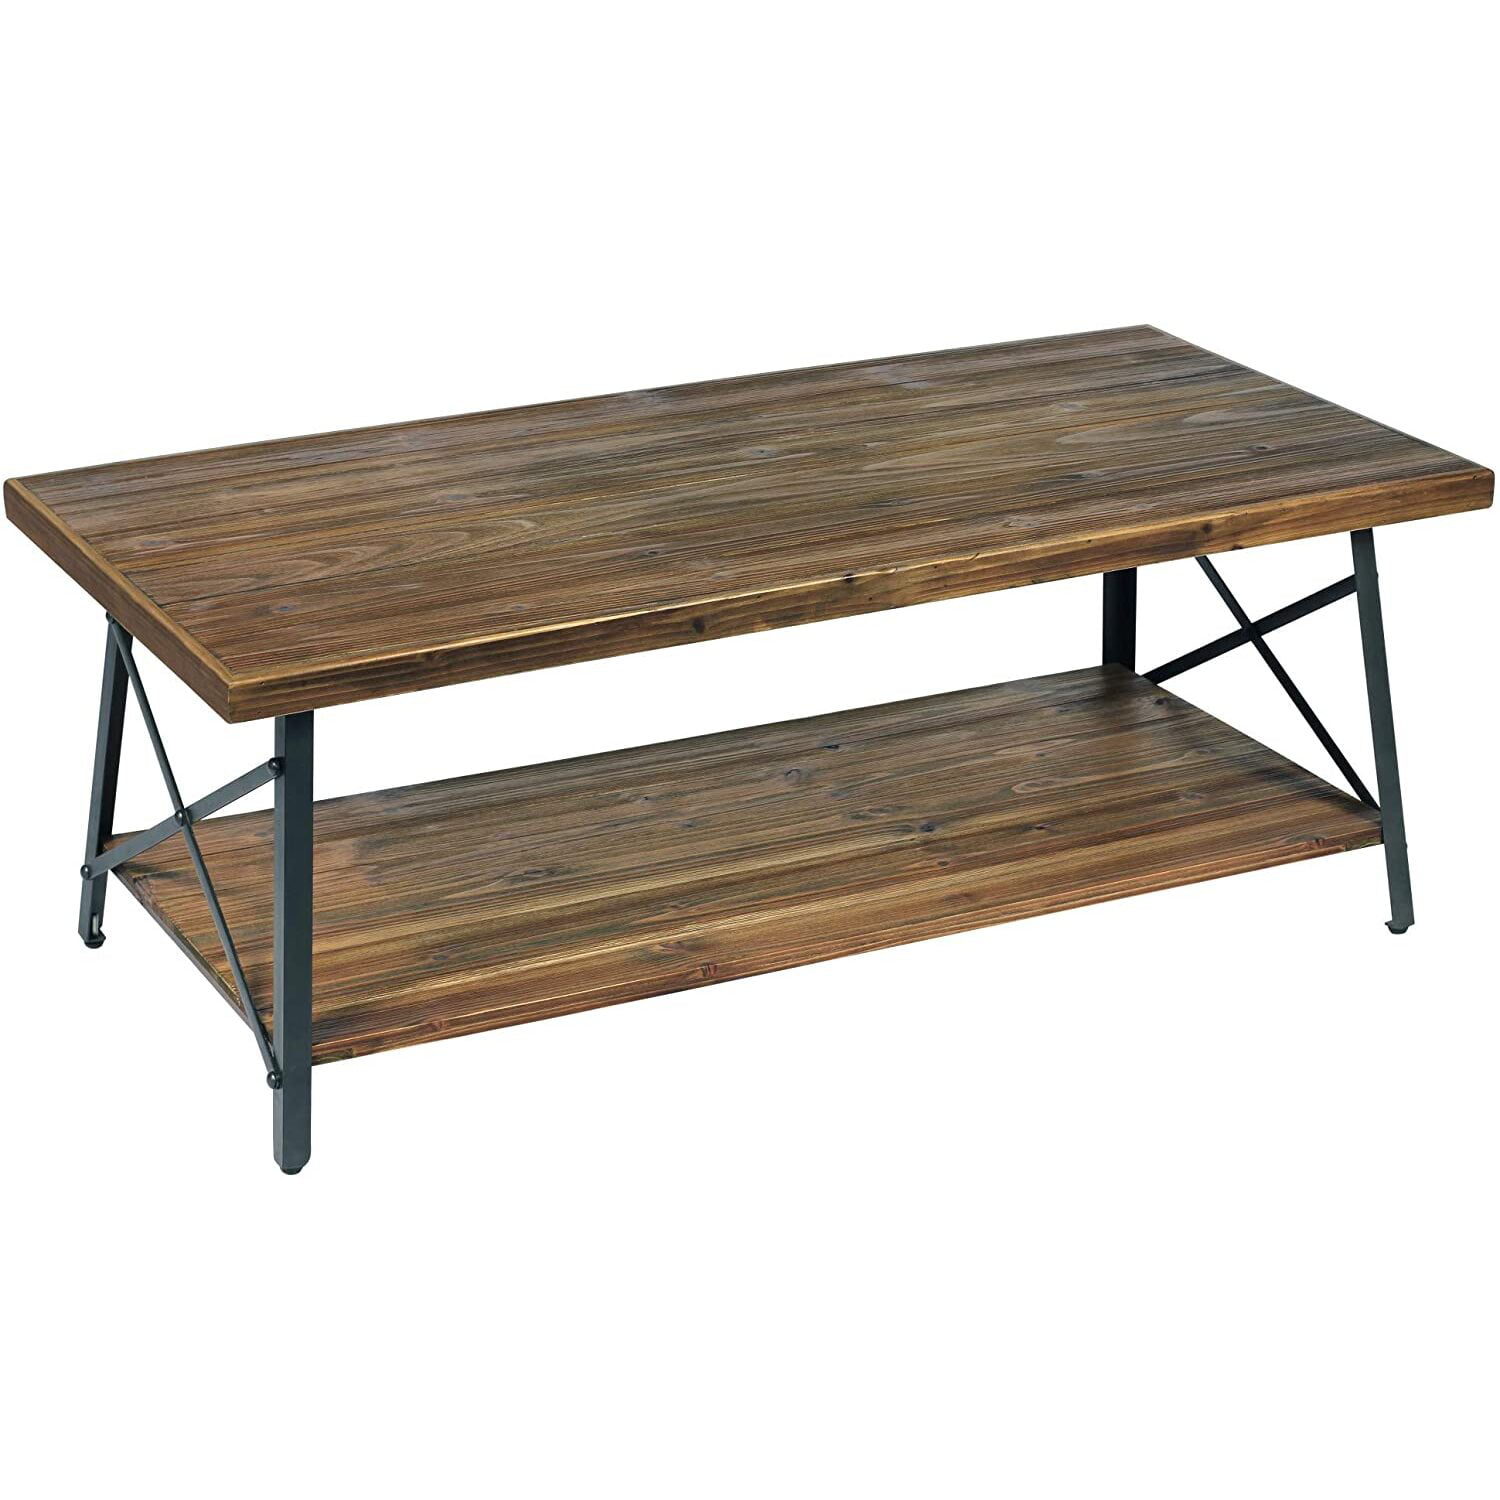 Wallace & Bay Chandler 48 Inch Long Rustic Open Storage Coffee Table Pine Brown 